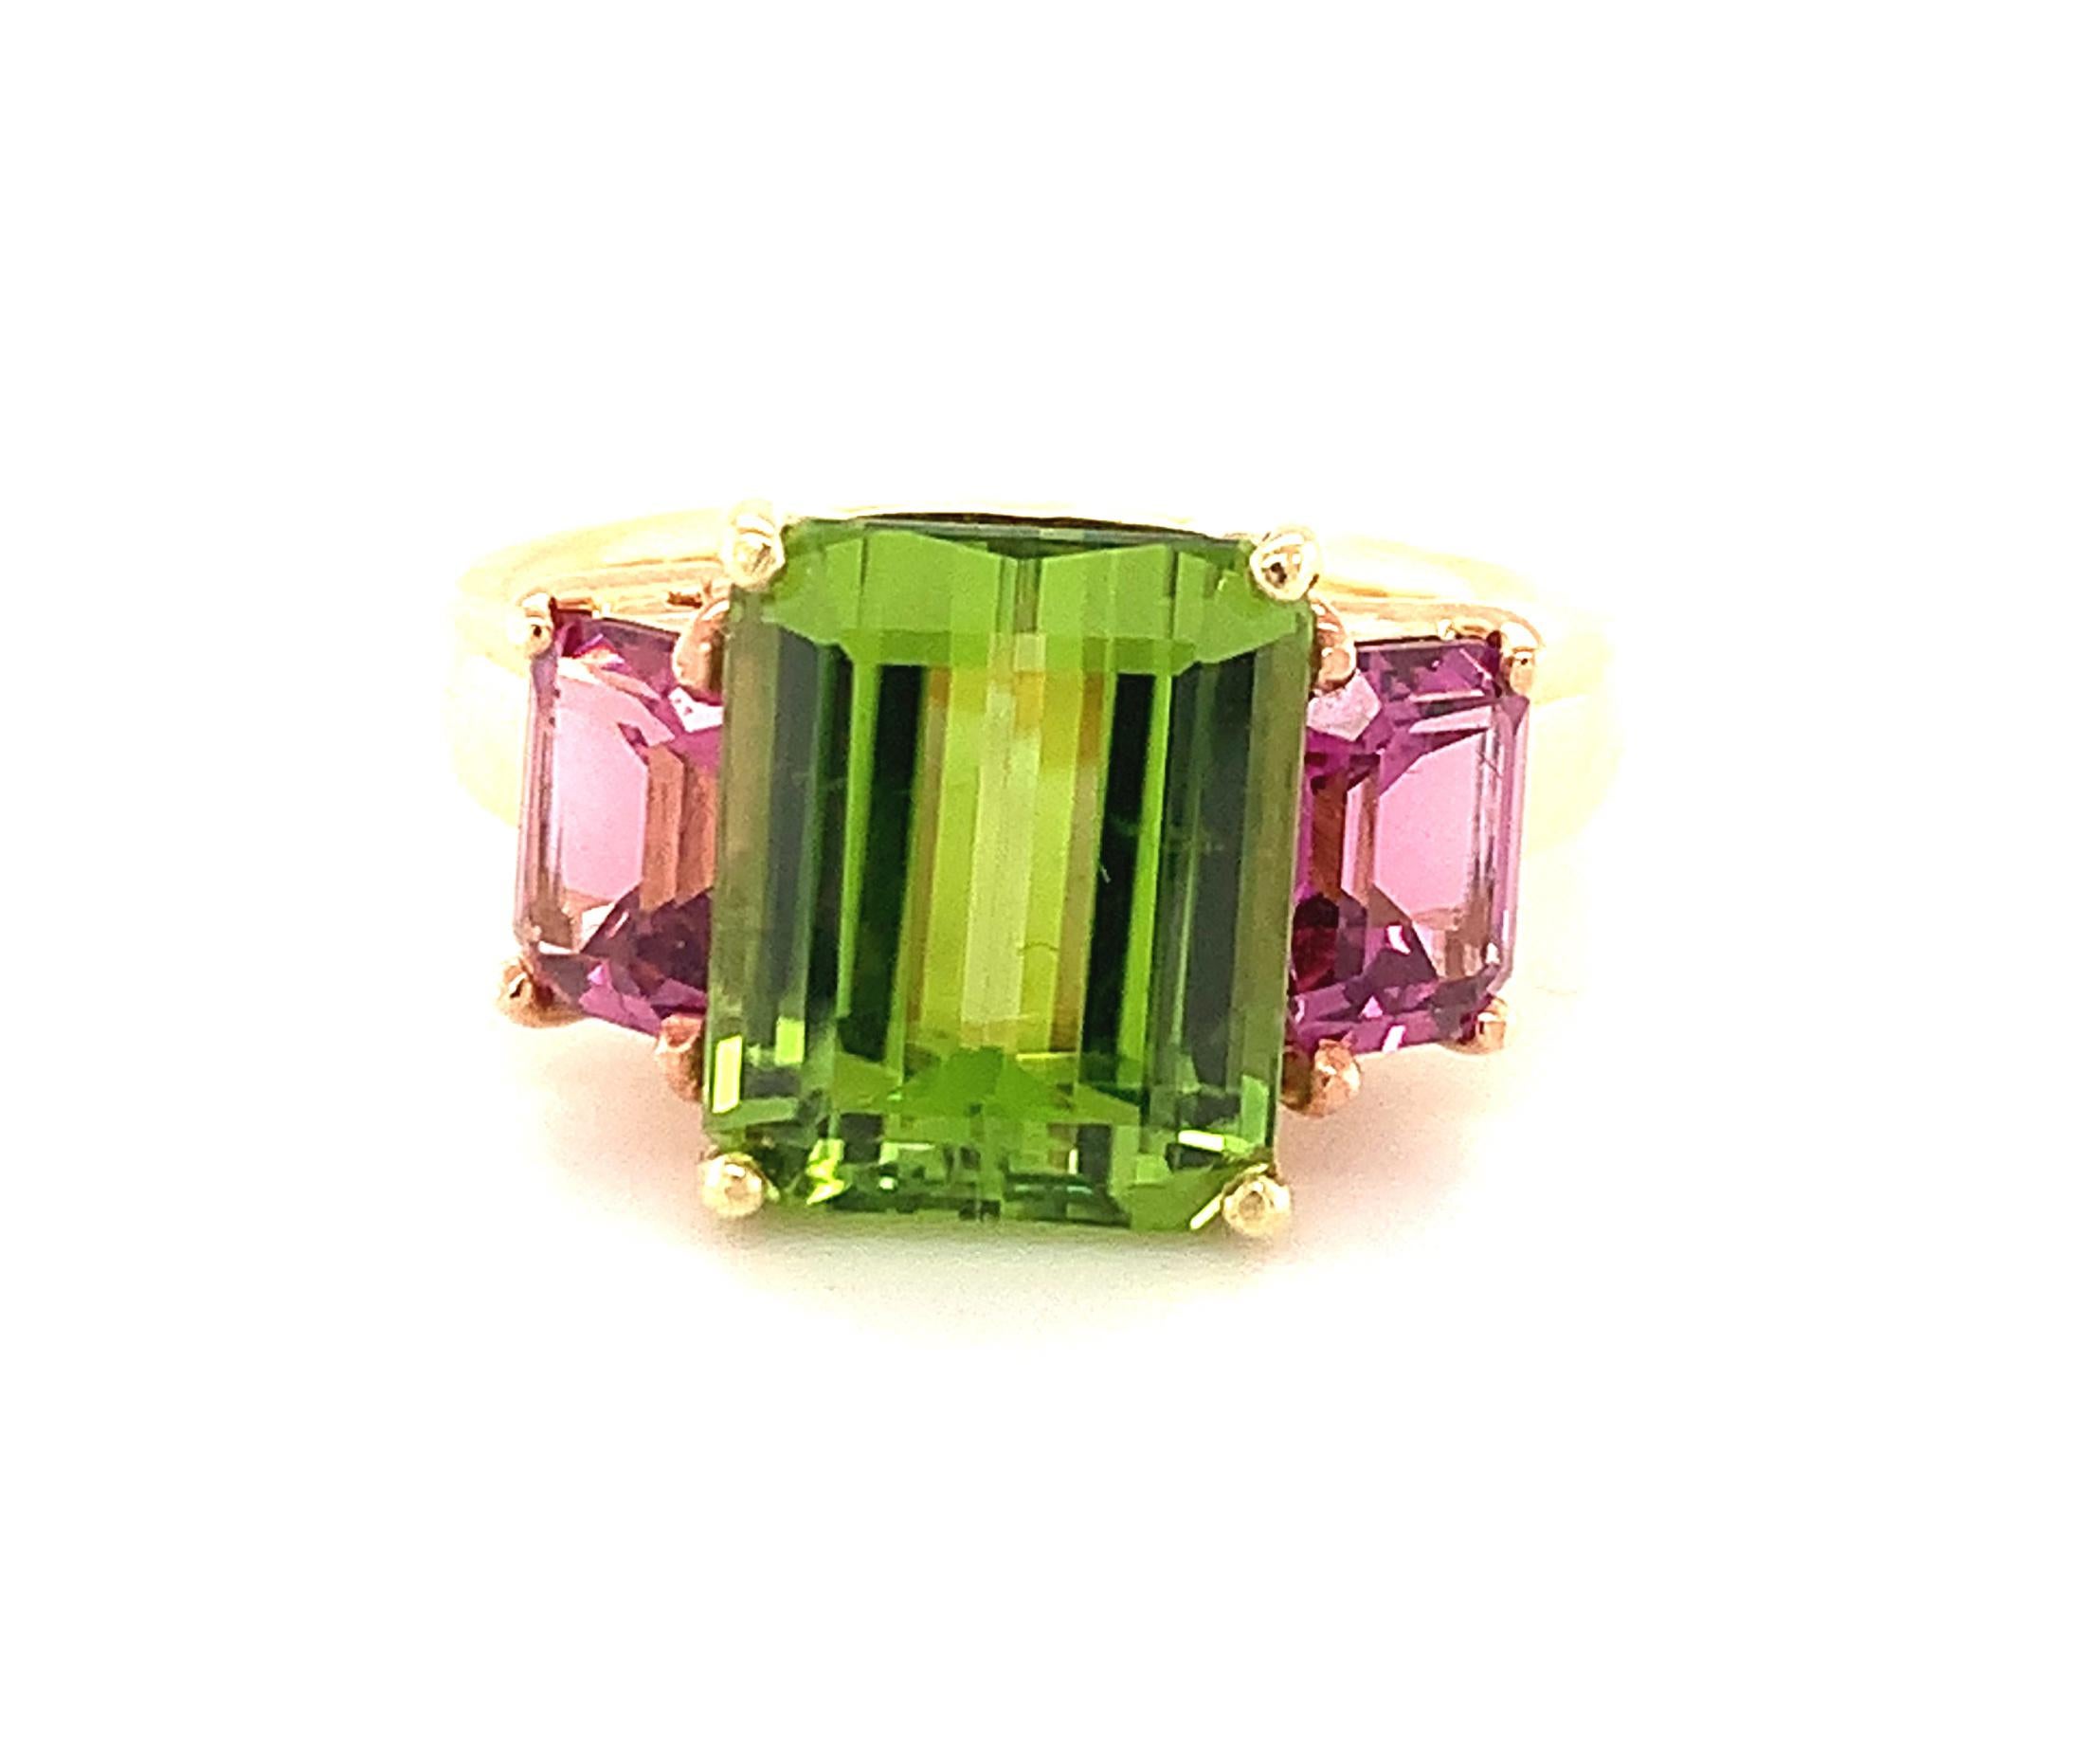 The cheerful pairing of bright, colorful gemstones makes this ring a joy to wear! A large, 5.49 carat grass-green peridot sits front and center, flanked by a pair of raspberry color rhodolite garnets in a sparkling pink and green combination that is